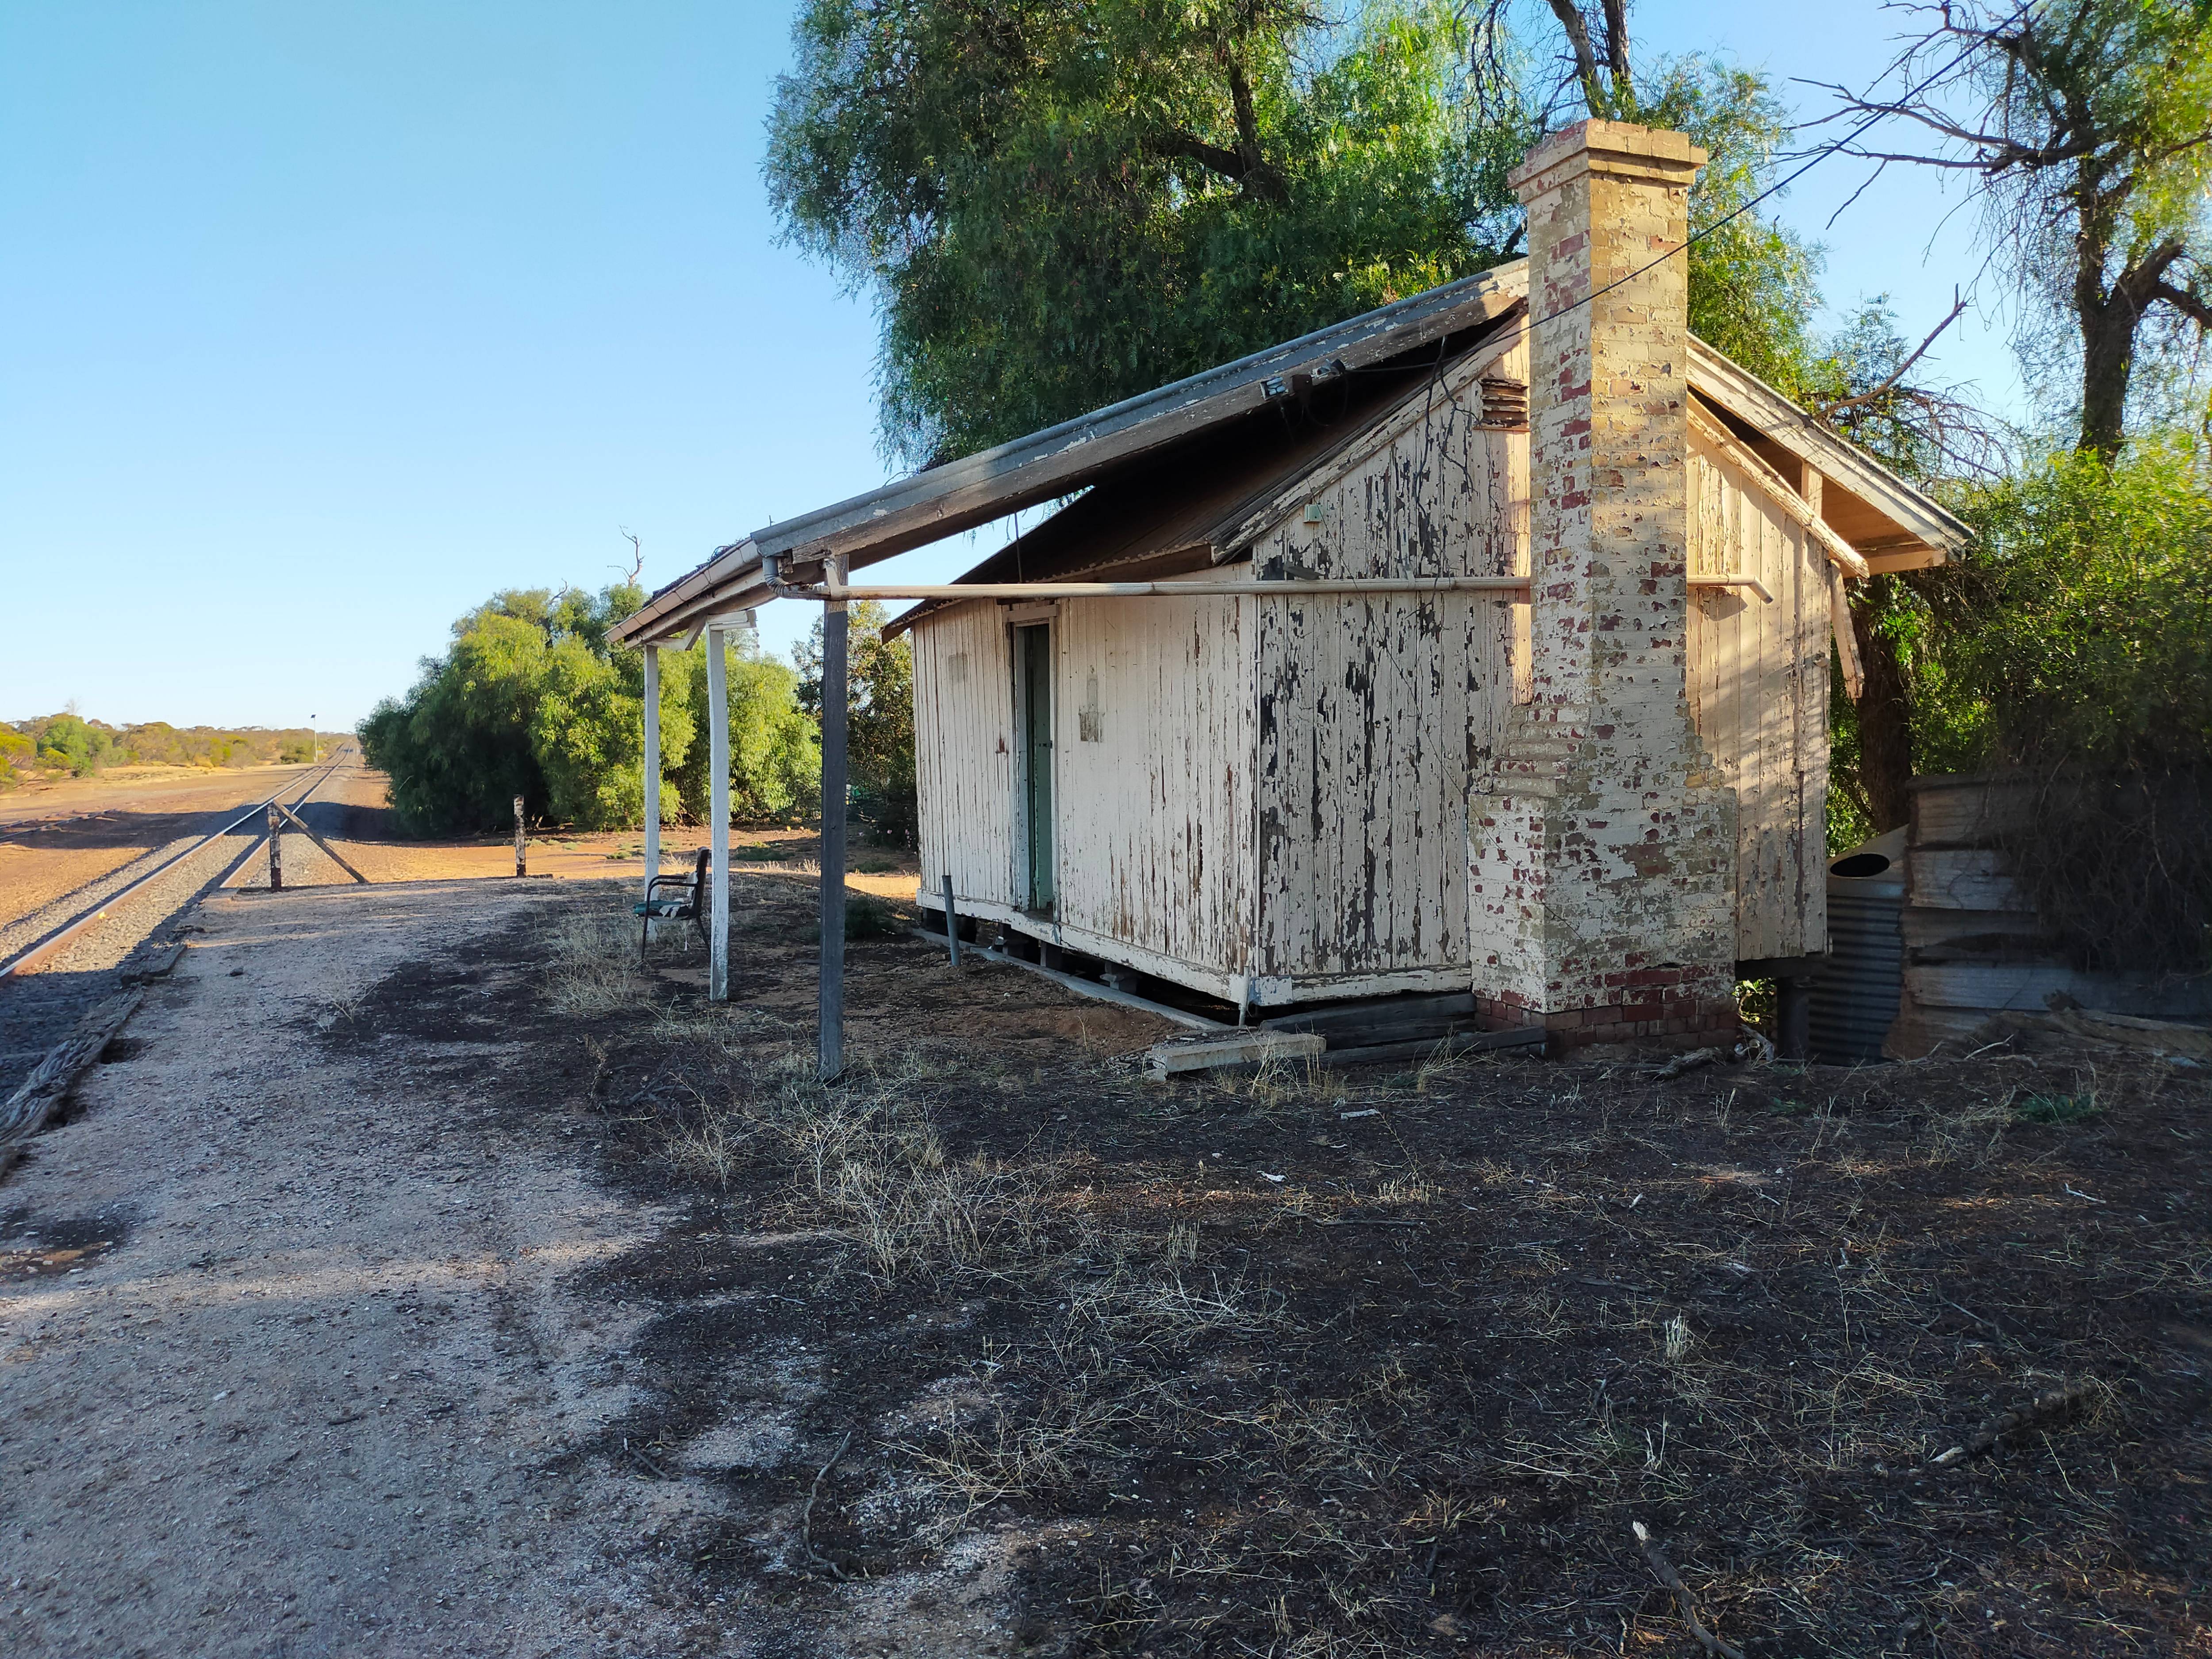 A dilapidated, yellowish-white, wooden building with flaking paint on a half overgrown gravel platform at Hattah Victoria